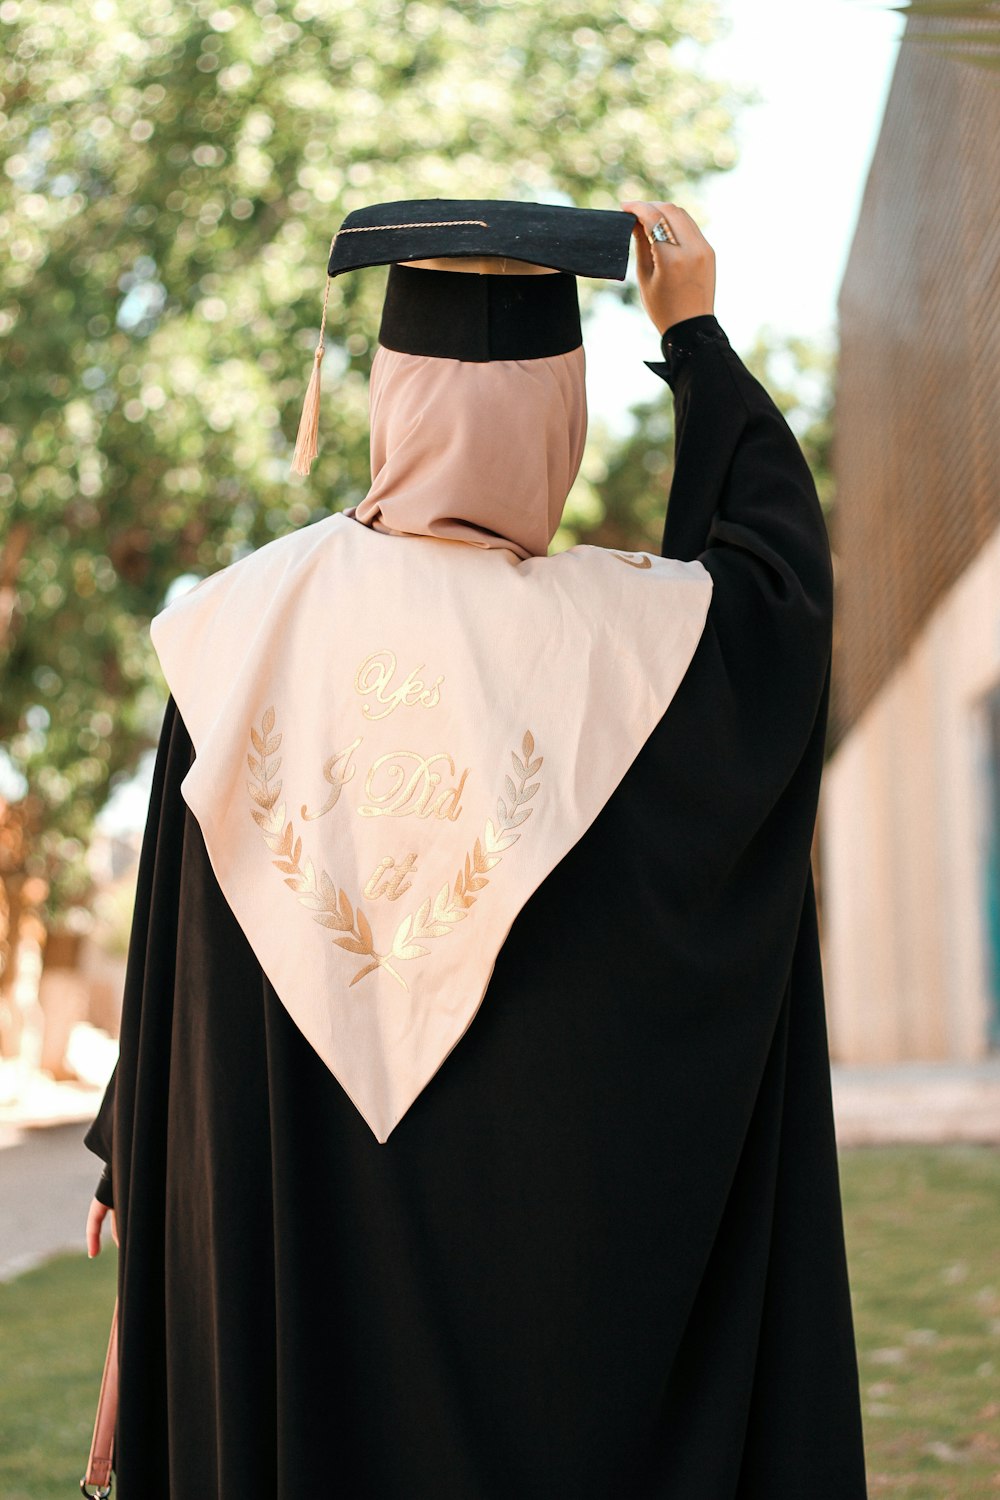 a person wearing a graduation gown and a hat